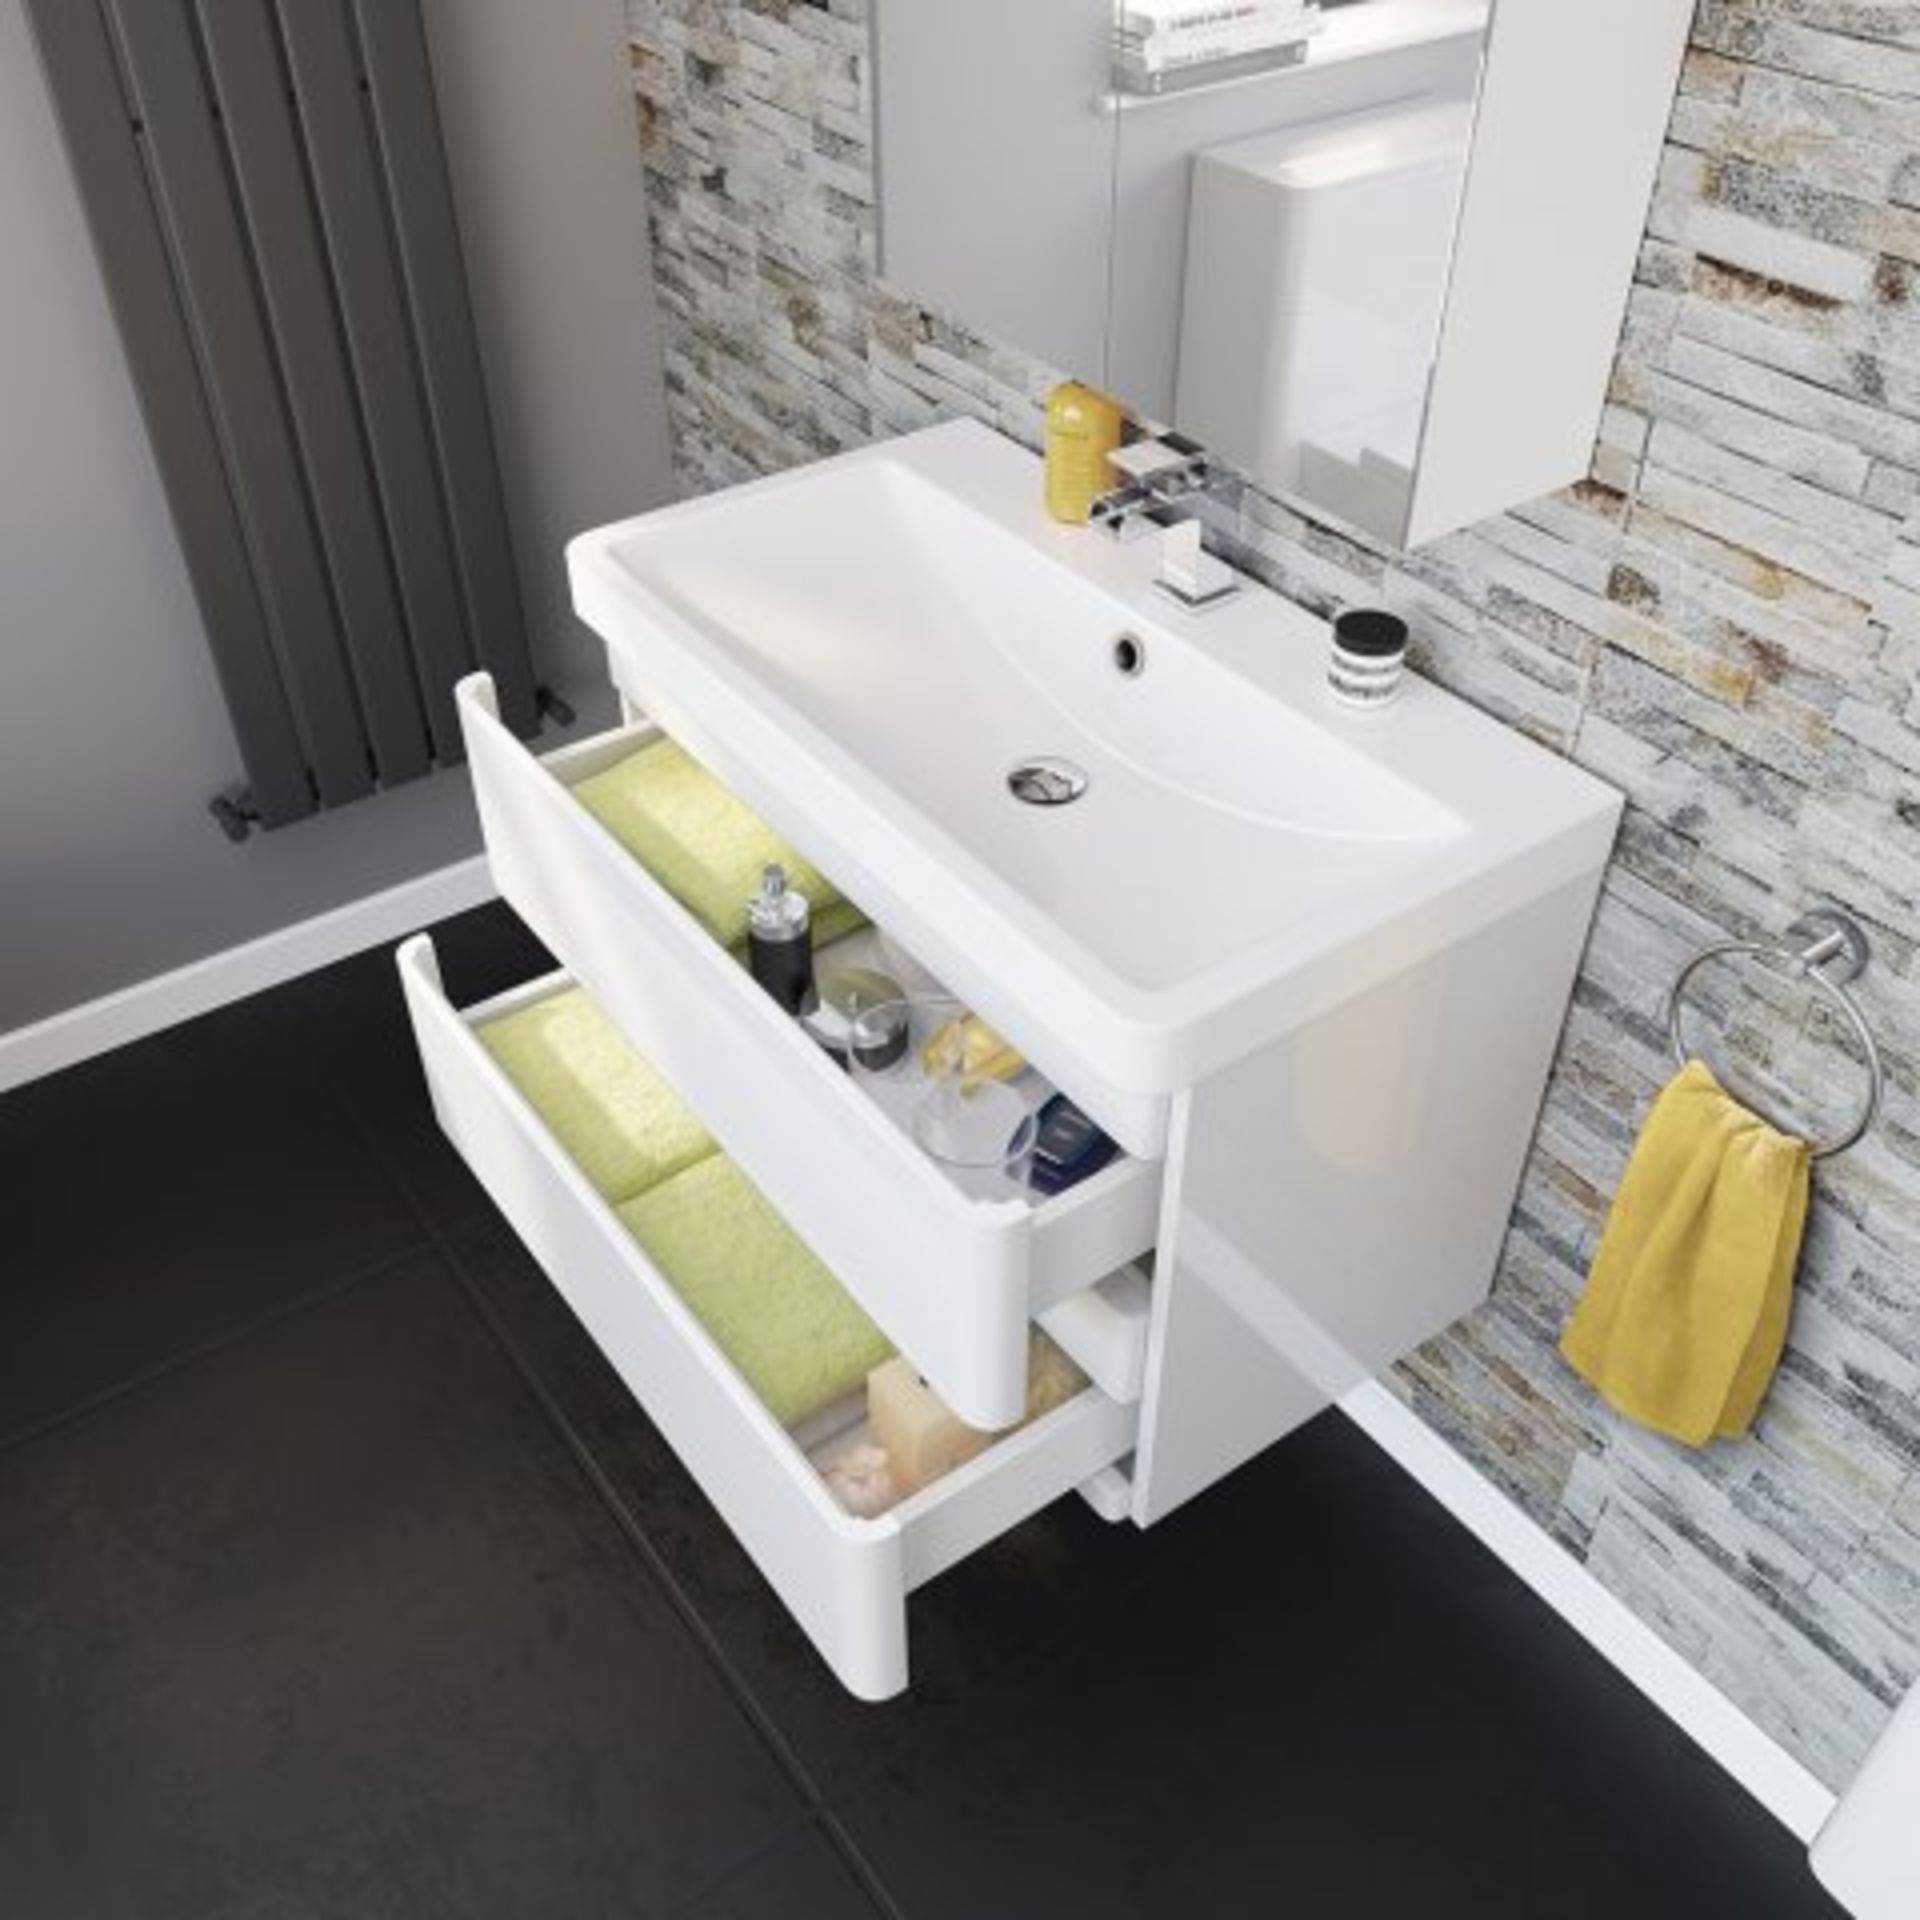 (I25) 800mm Denver II Gloss White Built In Basin Drawer Unit - Wall Hung. RRP £599.99. COMES - Image 2 of 4